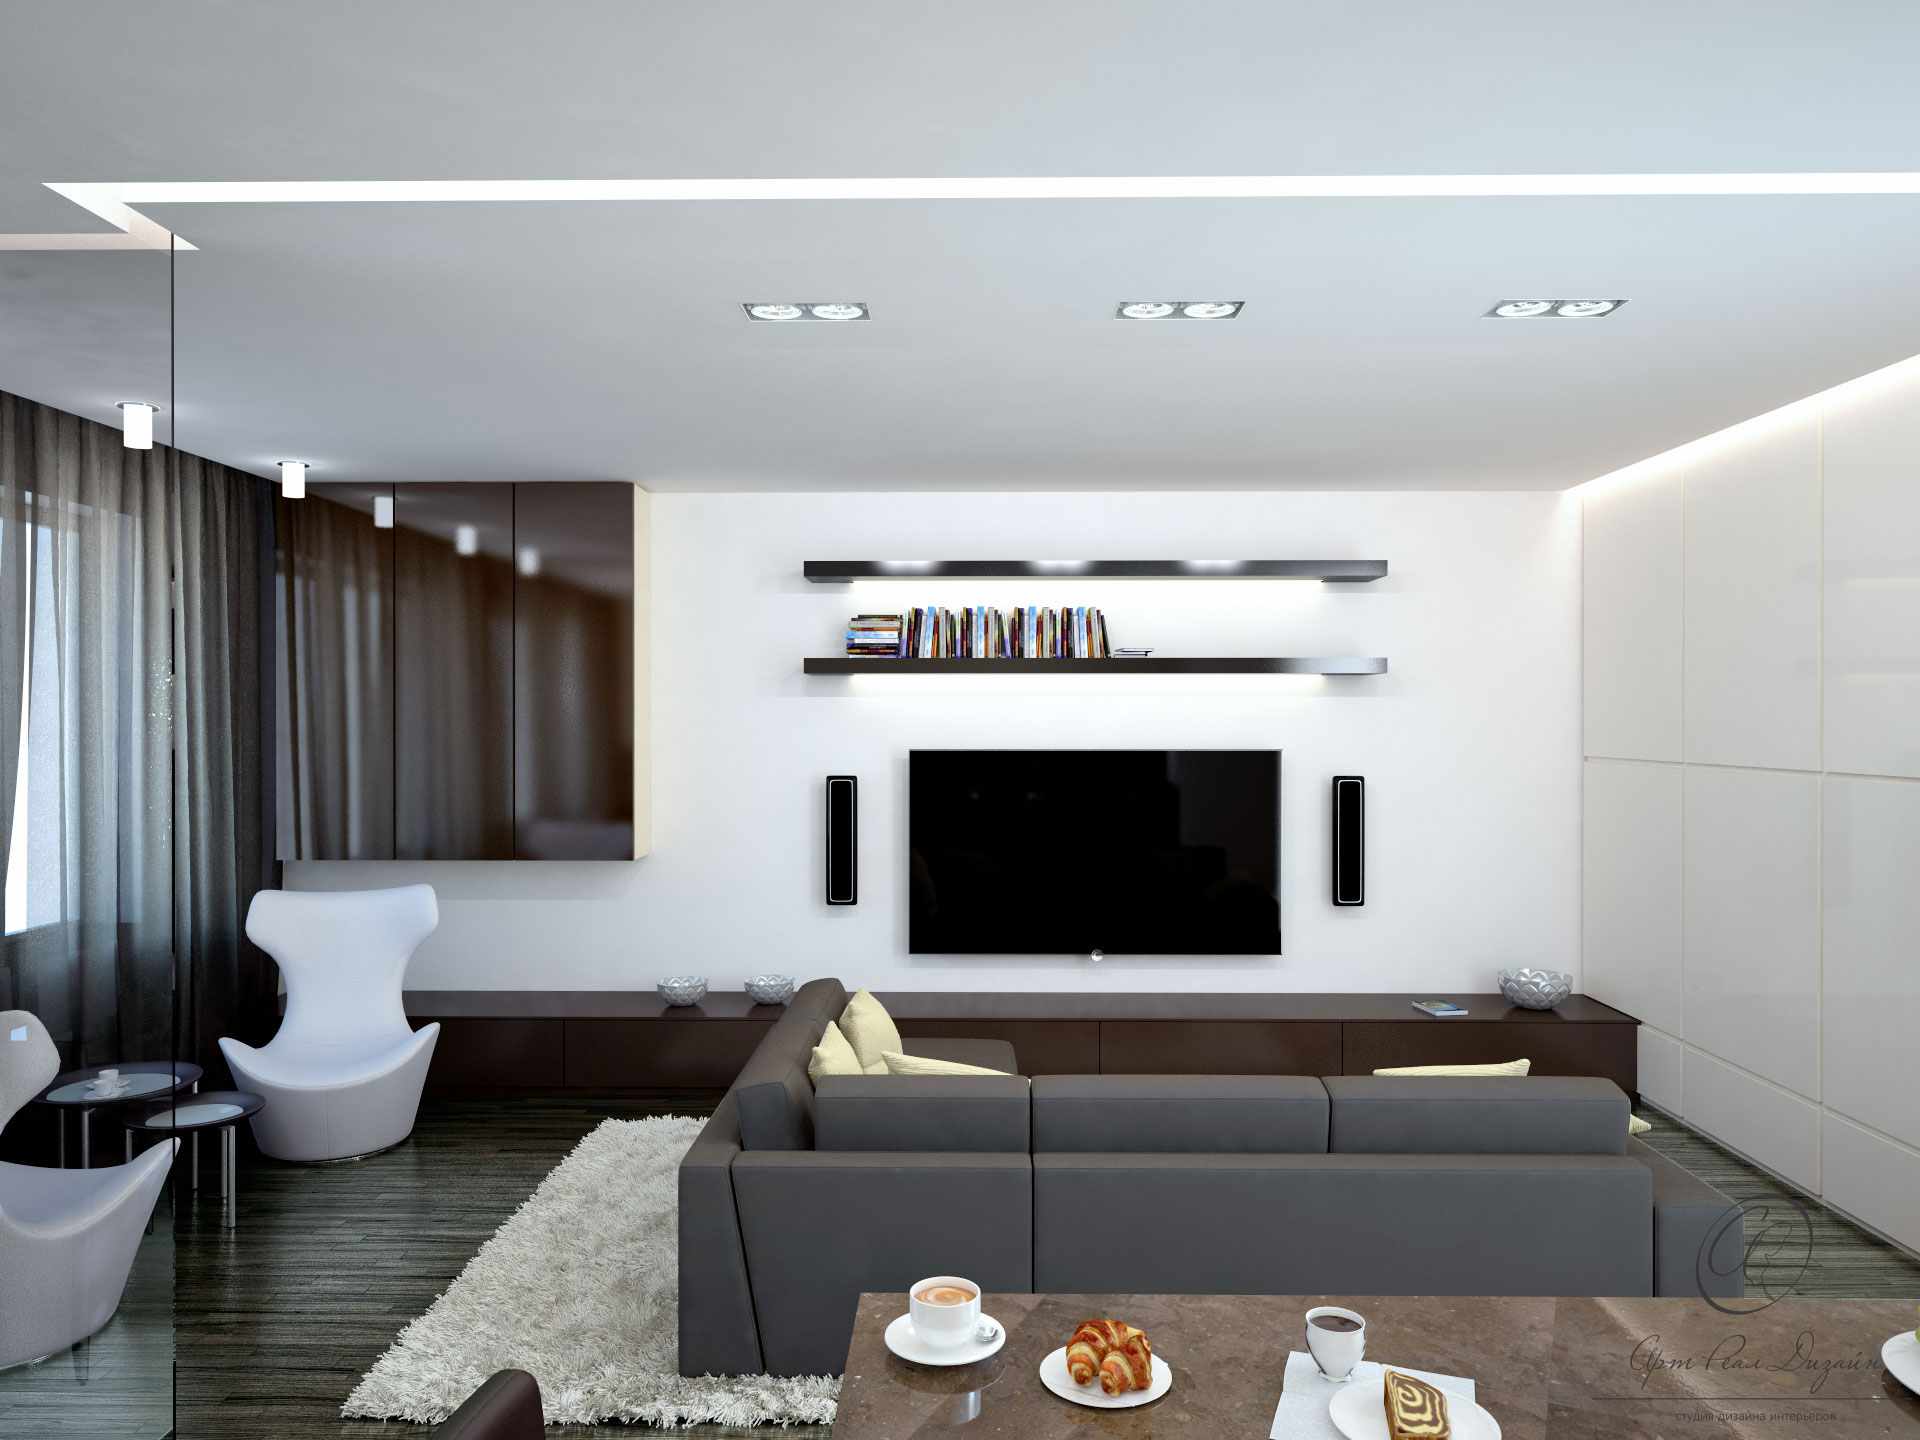 Minimalism for Living Room: Laconic Practical Design - Small Design Ideas